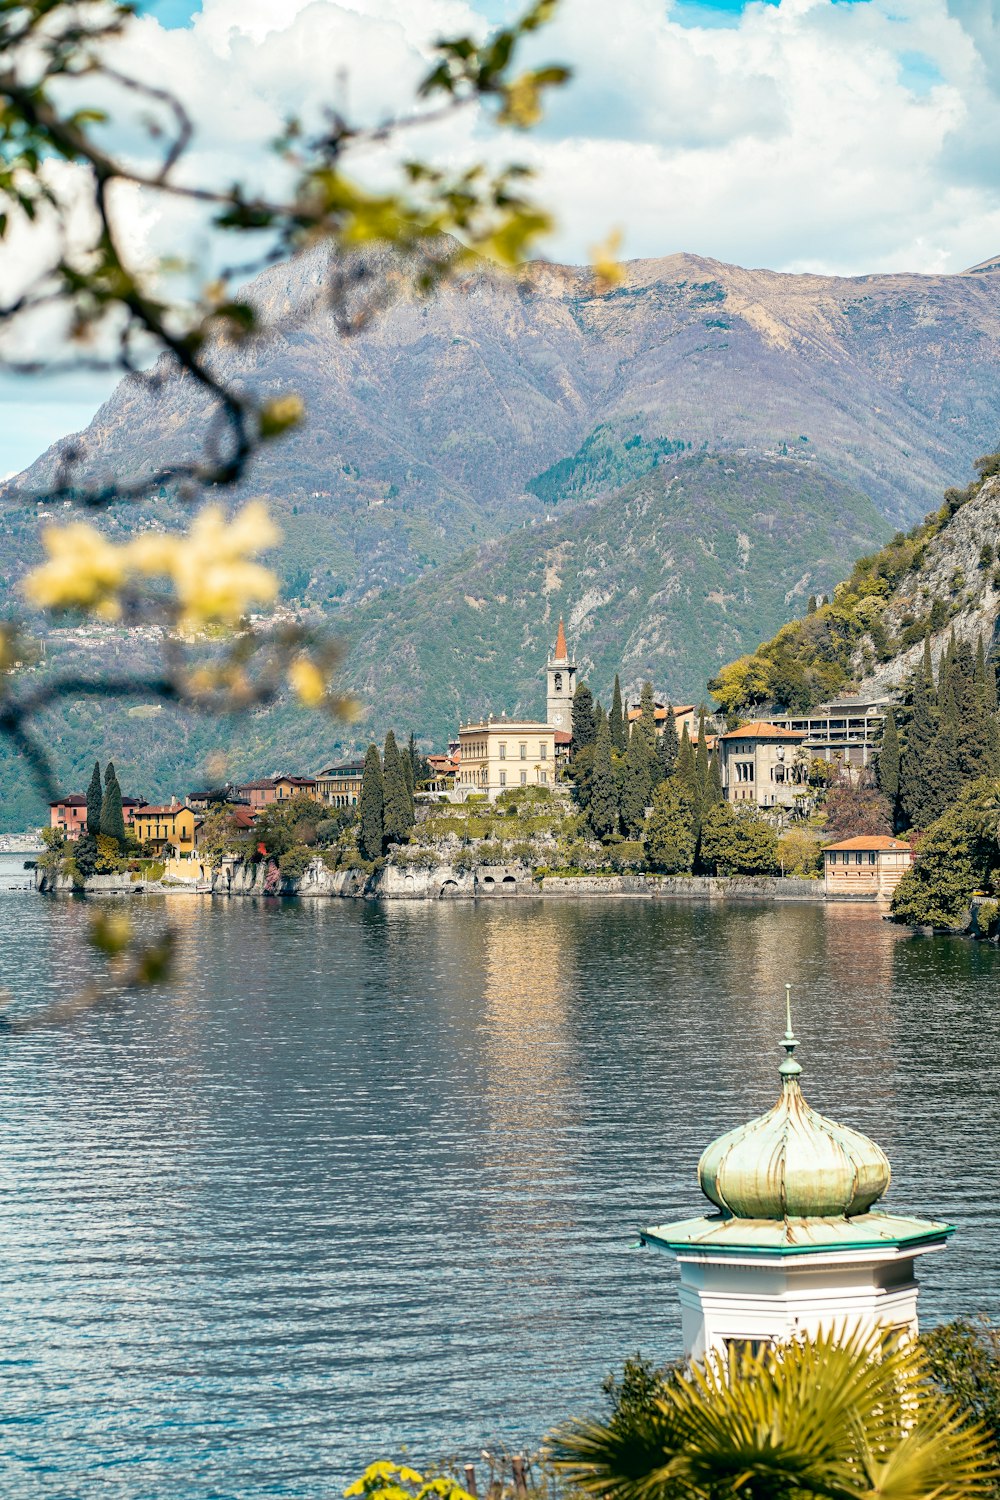 a scenic view of a lake with a church in the background